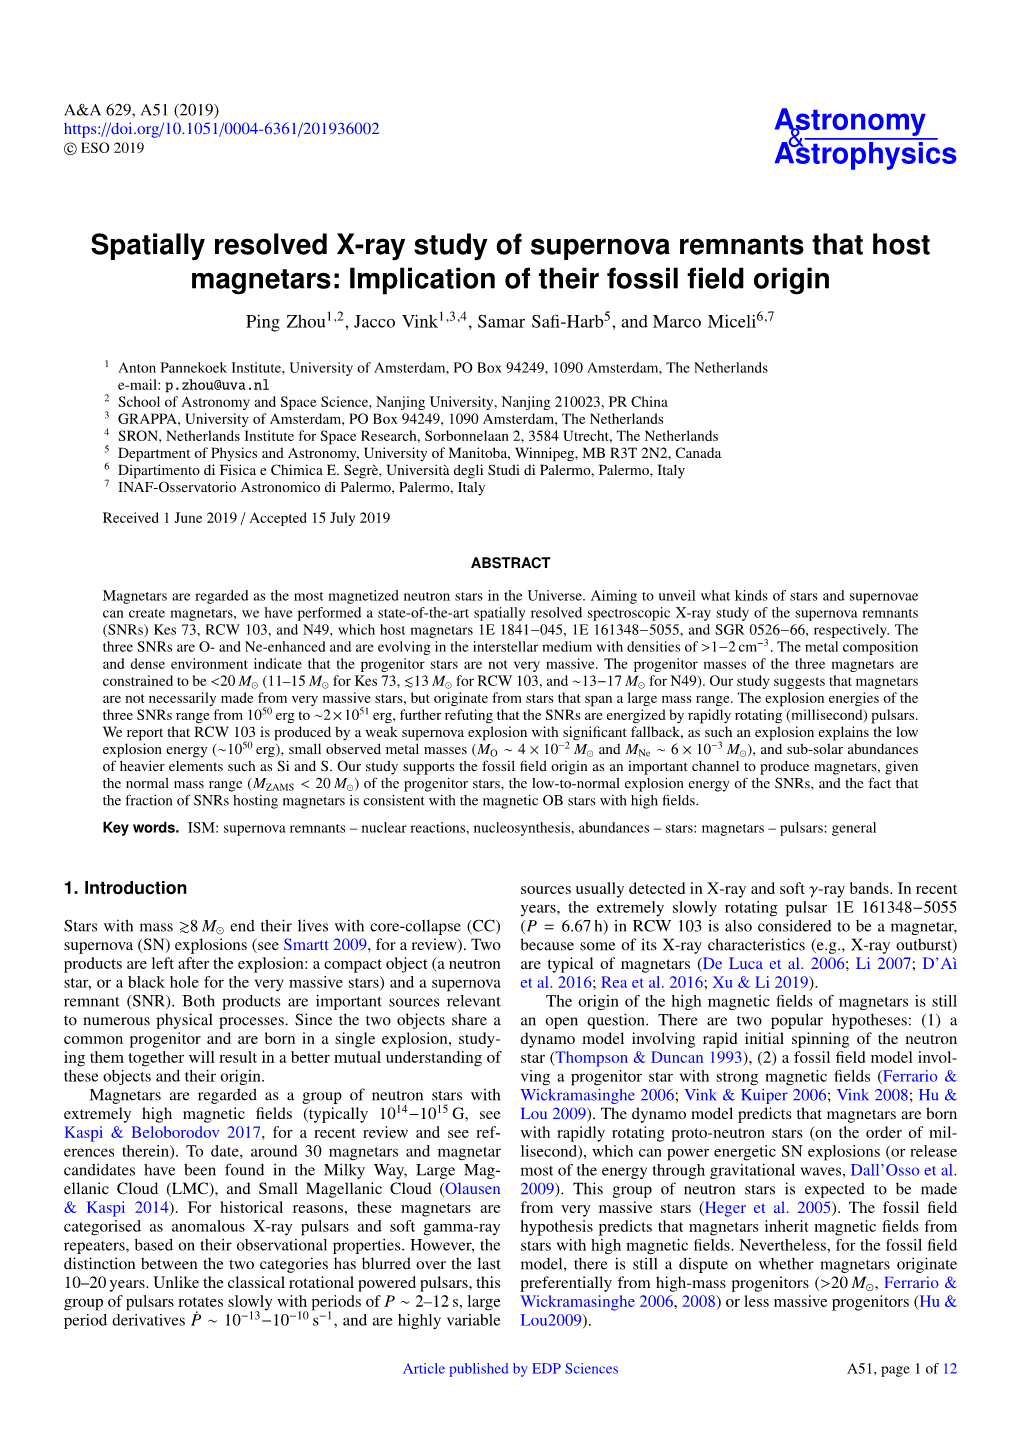 Spatially Resolved X-Ray Study of Supernova Remnants That Host Magnetars